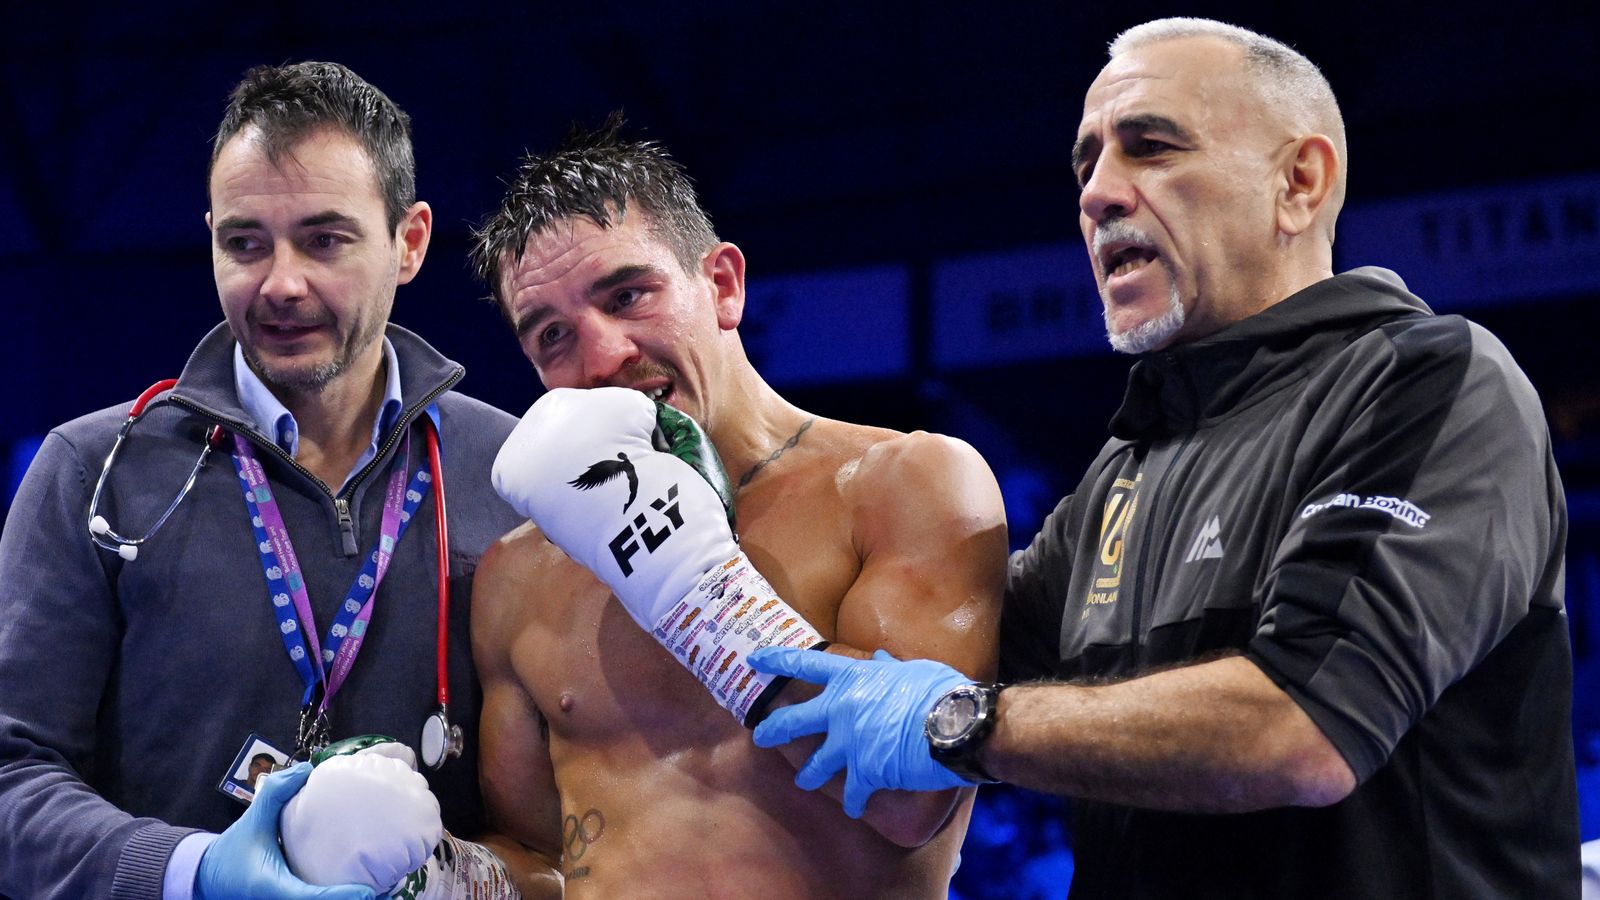 Michael Conlan is helped to his corner by medical staff and a coach after the Referee stops the fight, leading to victory for Jordan Gill after defeating Michael Conlan, during the WBA International Super Featherweight Title fight